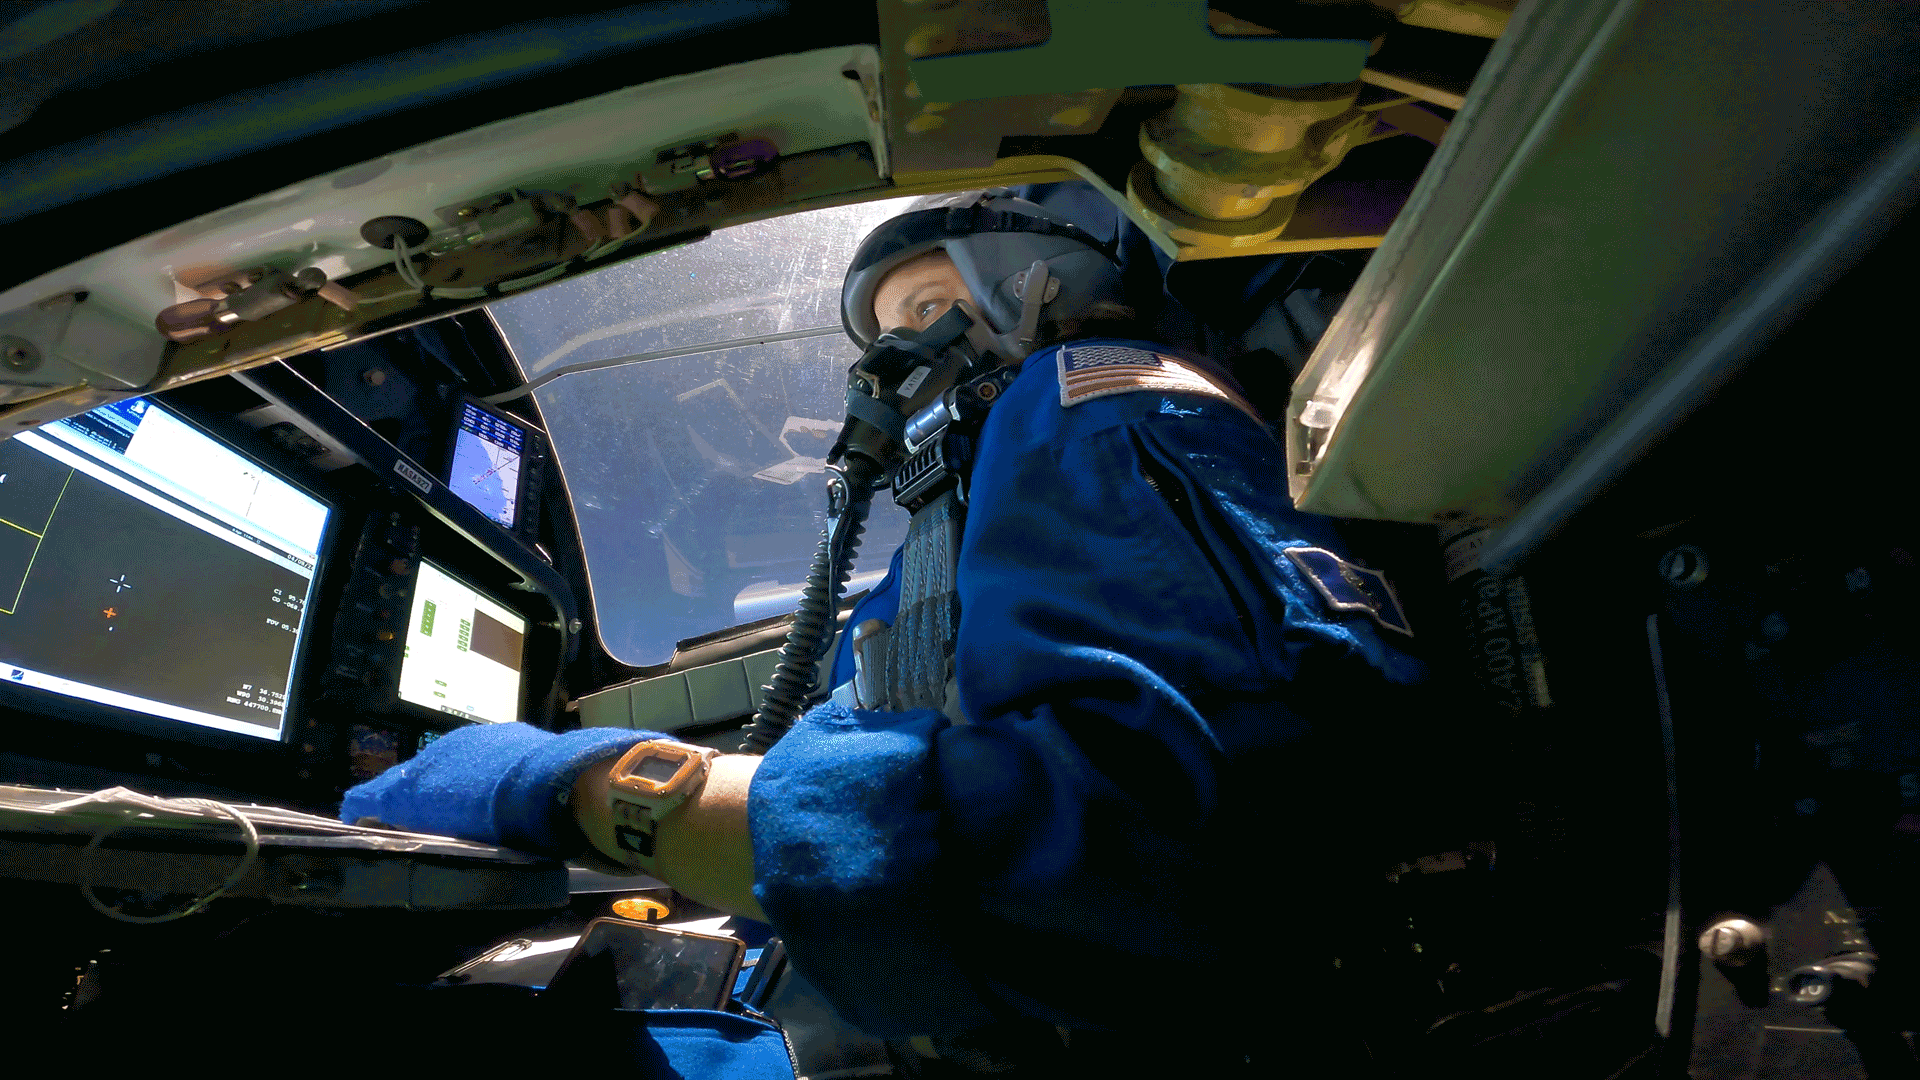 While flying, a view of tha pilot up in tha cockpit from below her seat. Da pilot is bustin a funky-ass blue suit n' a helmet wit a tube attached ta tha front. In front of her is nuff muthafuckin screens, includin one showin tha total solar eclipse. Da cockpit gets darker n' darker as she flies up in tha eclipse's shadow.